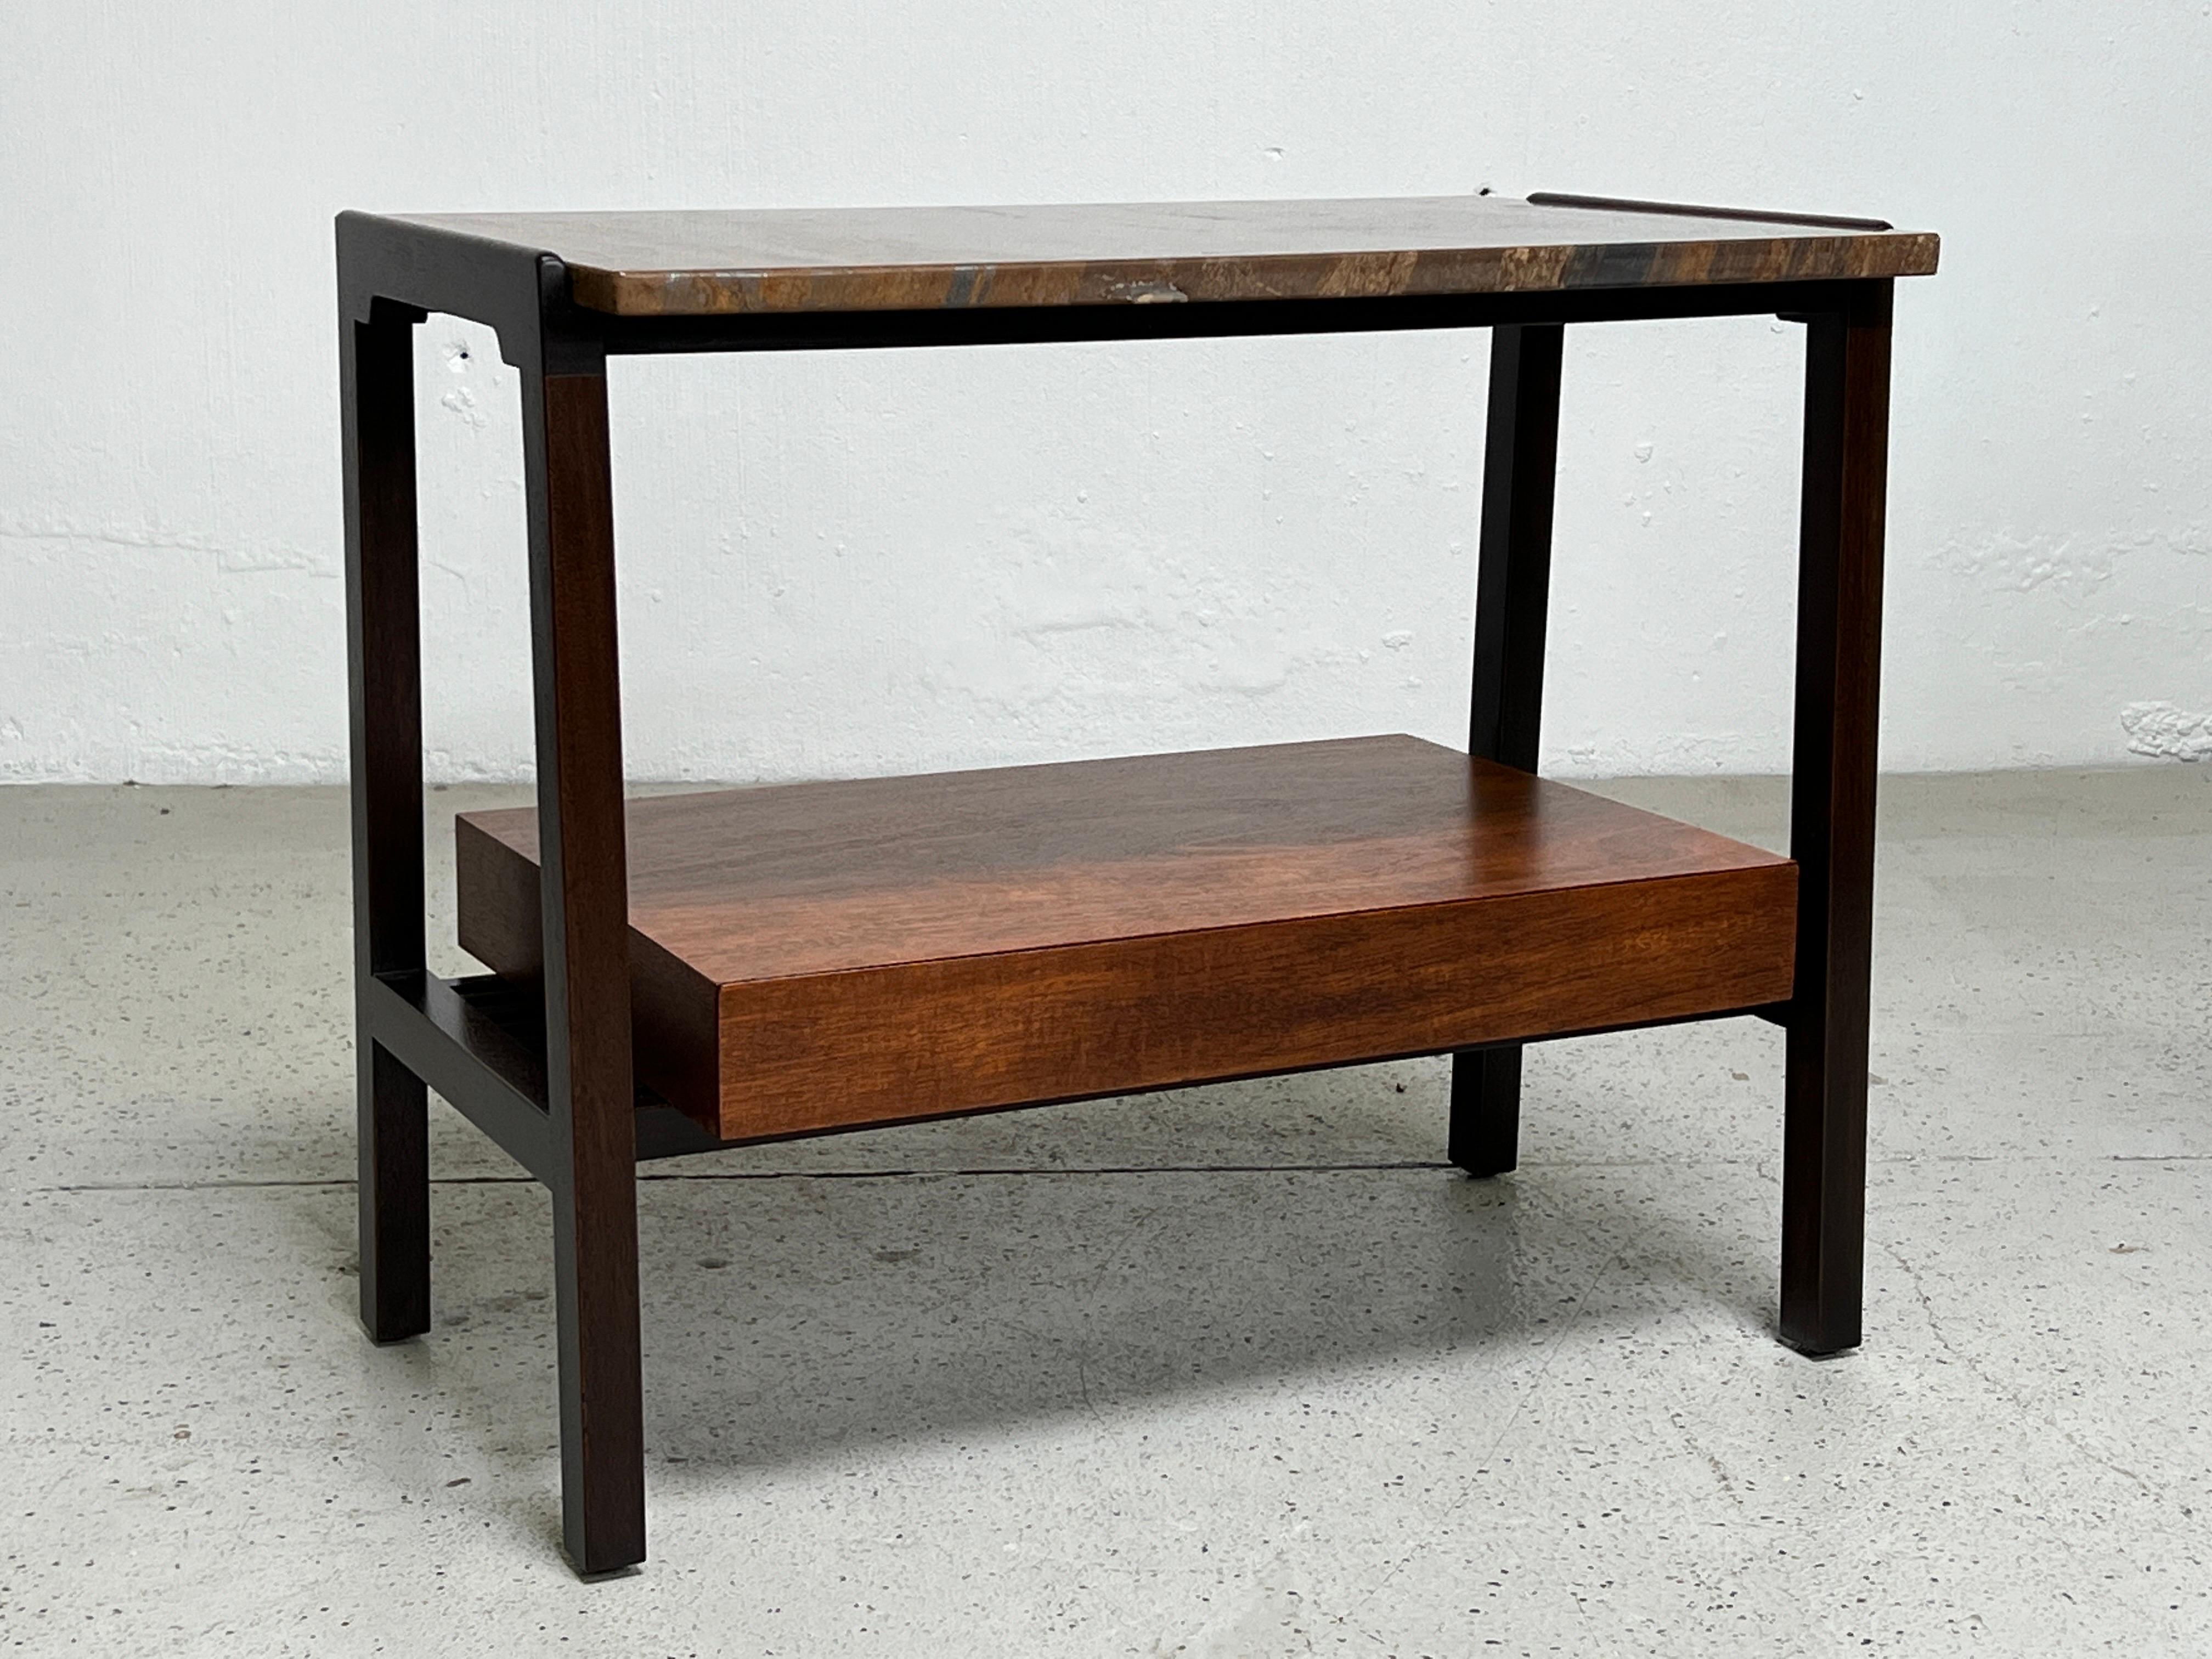 Pair of Nightstands by Edward Wormley for Dunbar 1